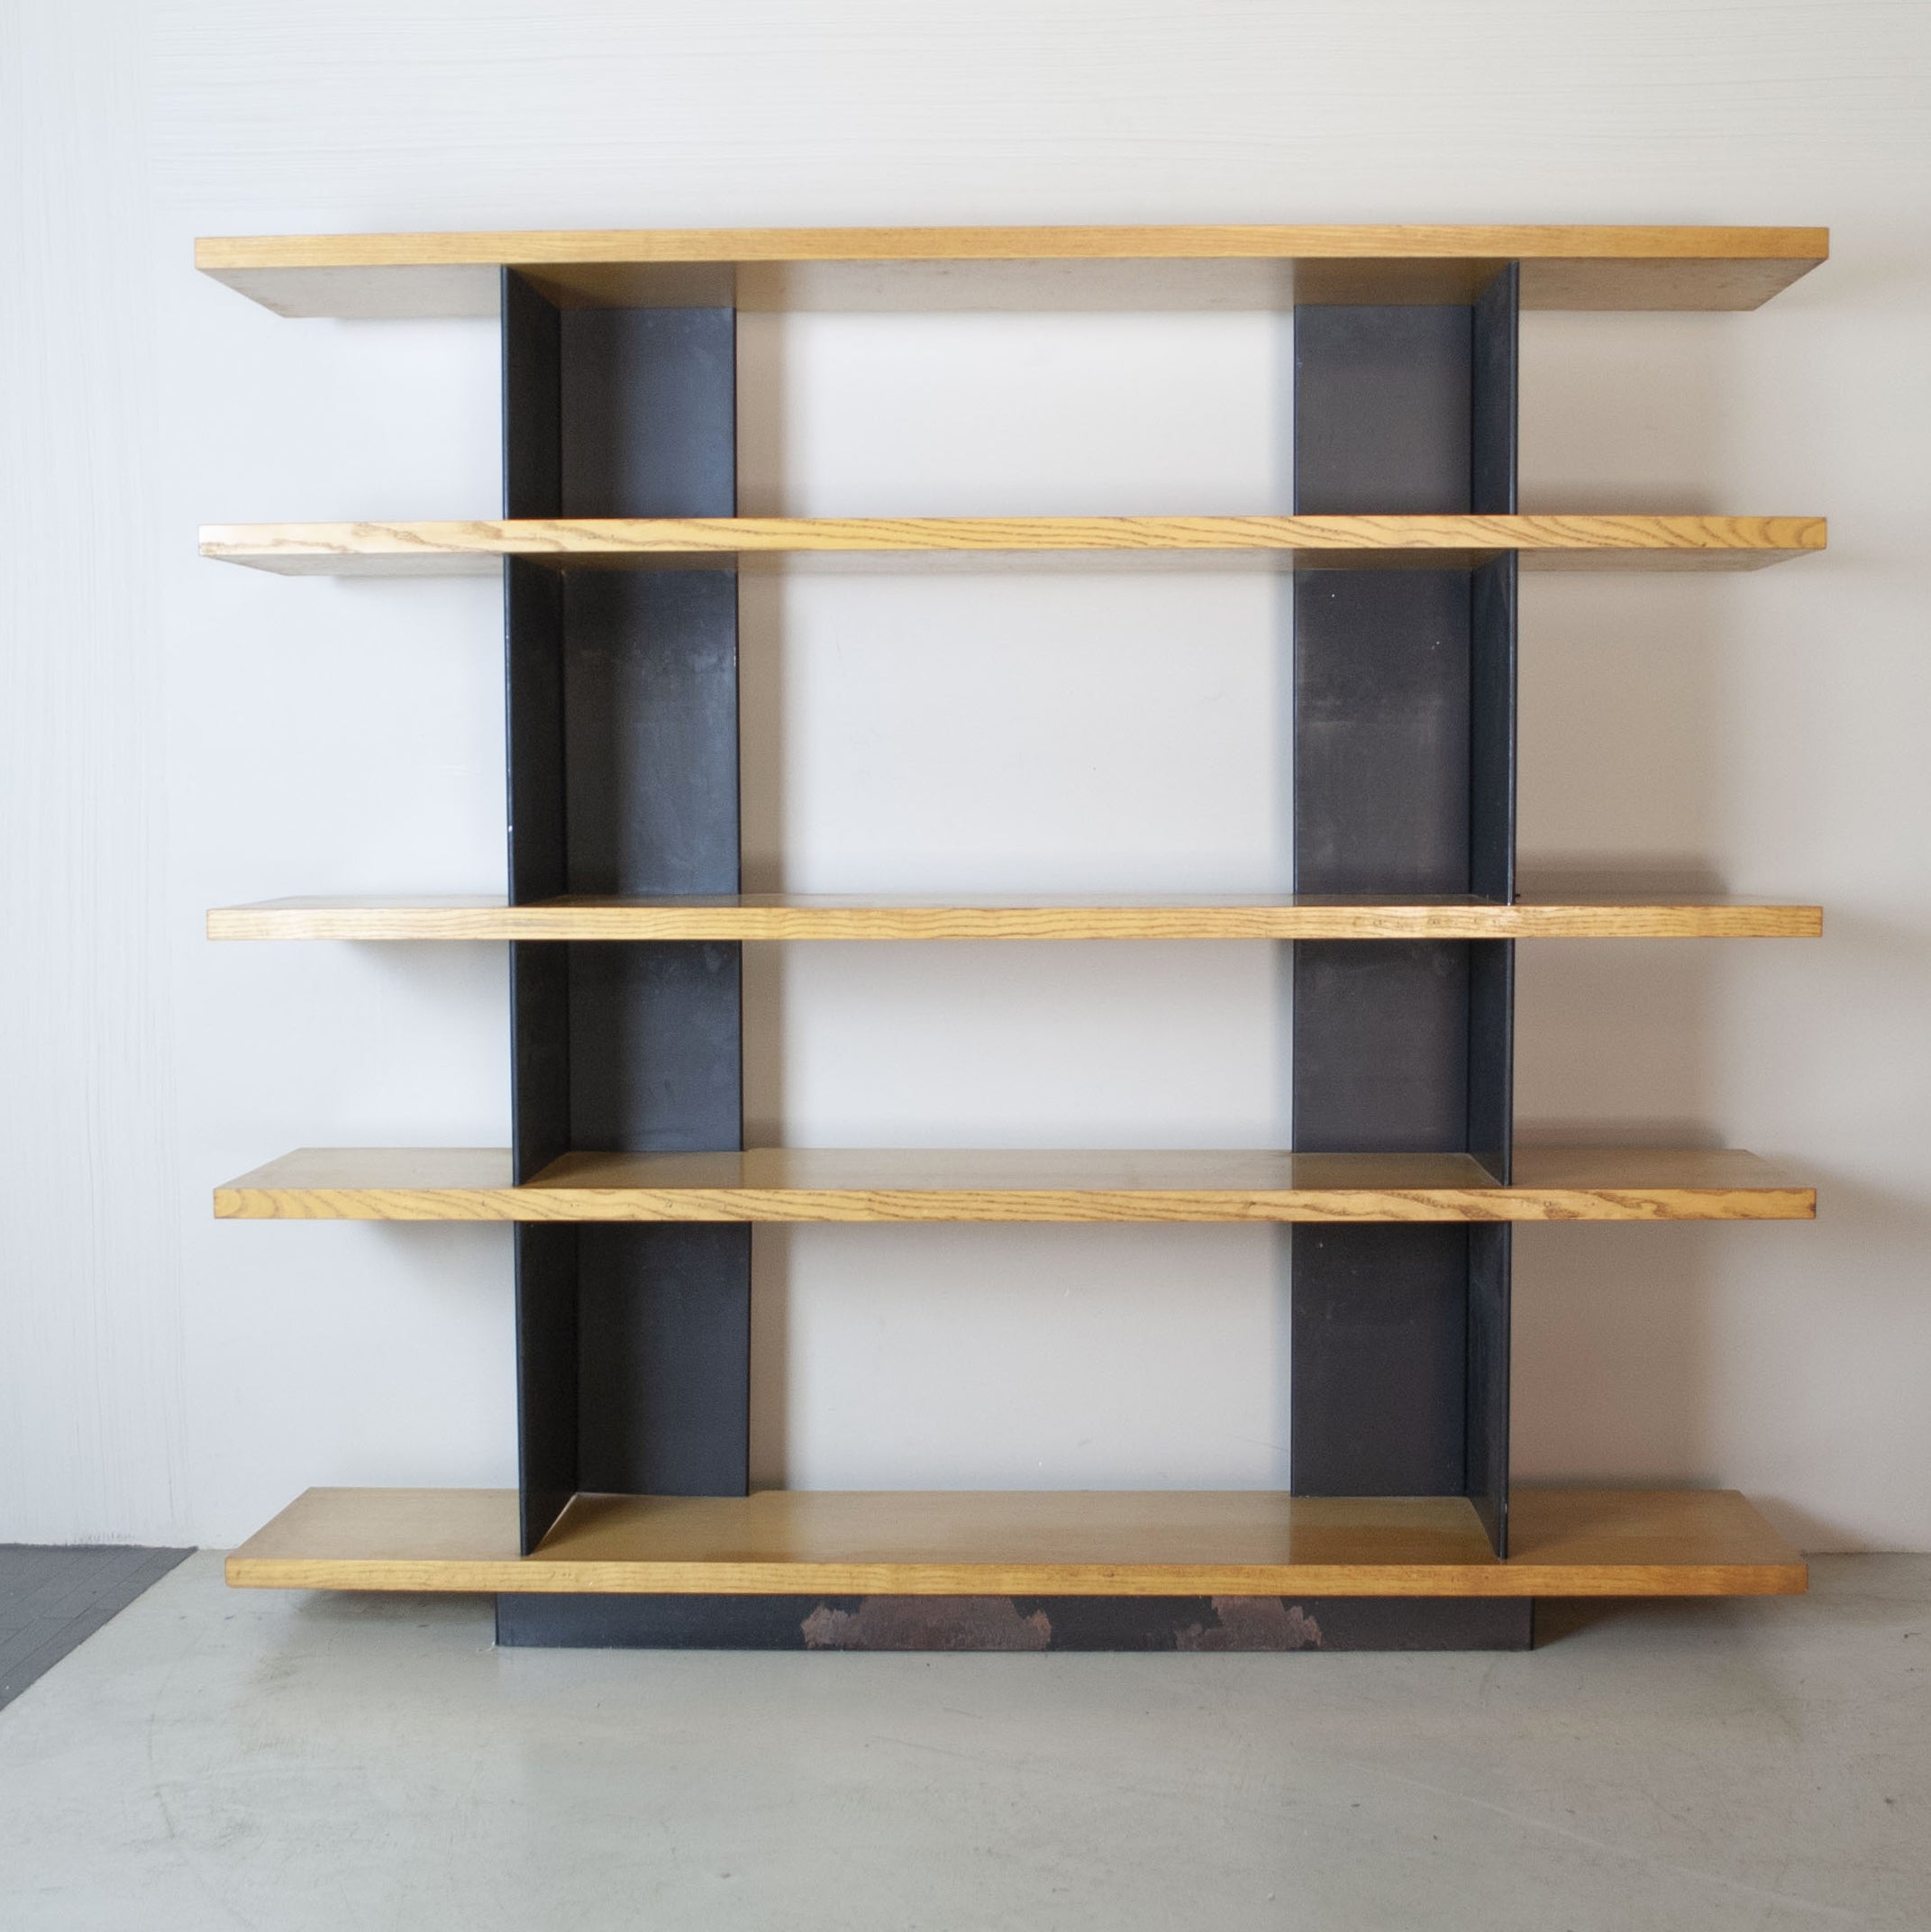 Modernist piece that takes design notes from Charlotte Perriand. With four thick beech shelves and steel black sheet metal brackets.

